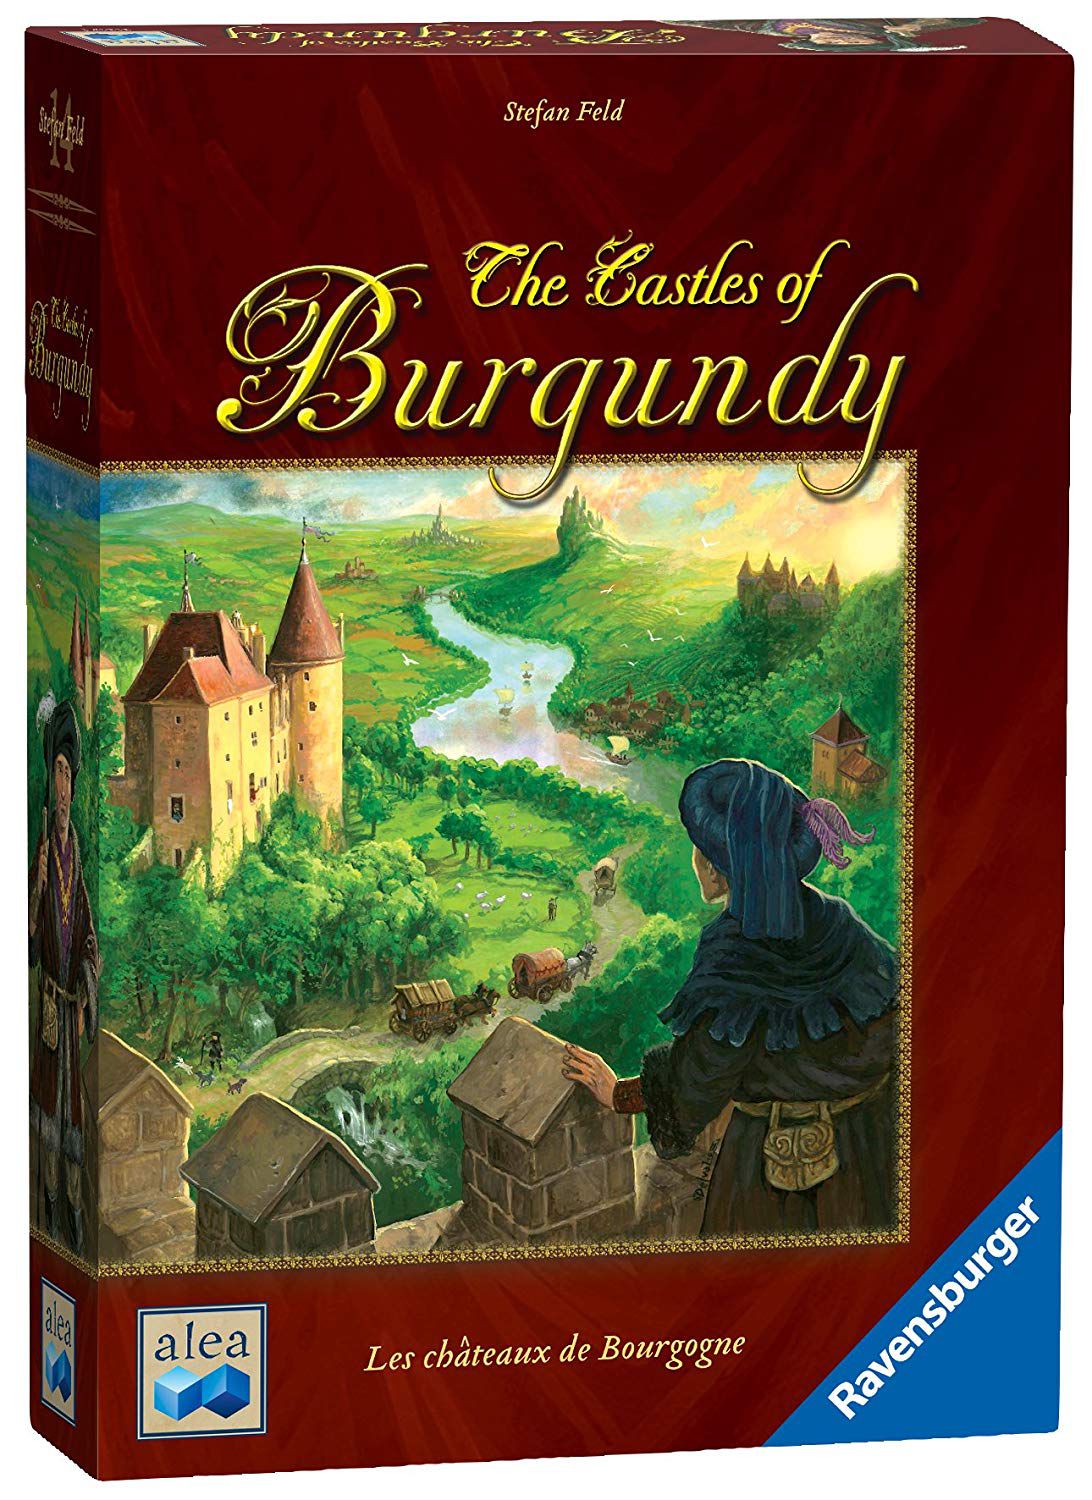 Cover art for The Castles of Burgundy shows a man looking out of the battlements of an elaborate country house along a river at sunrise.